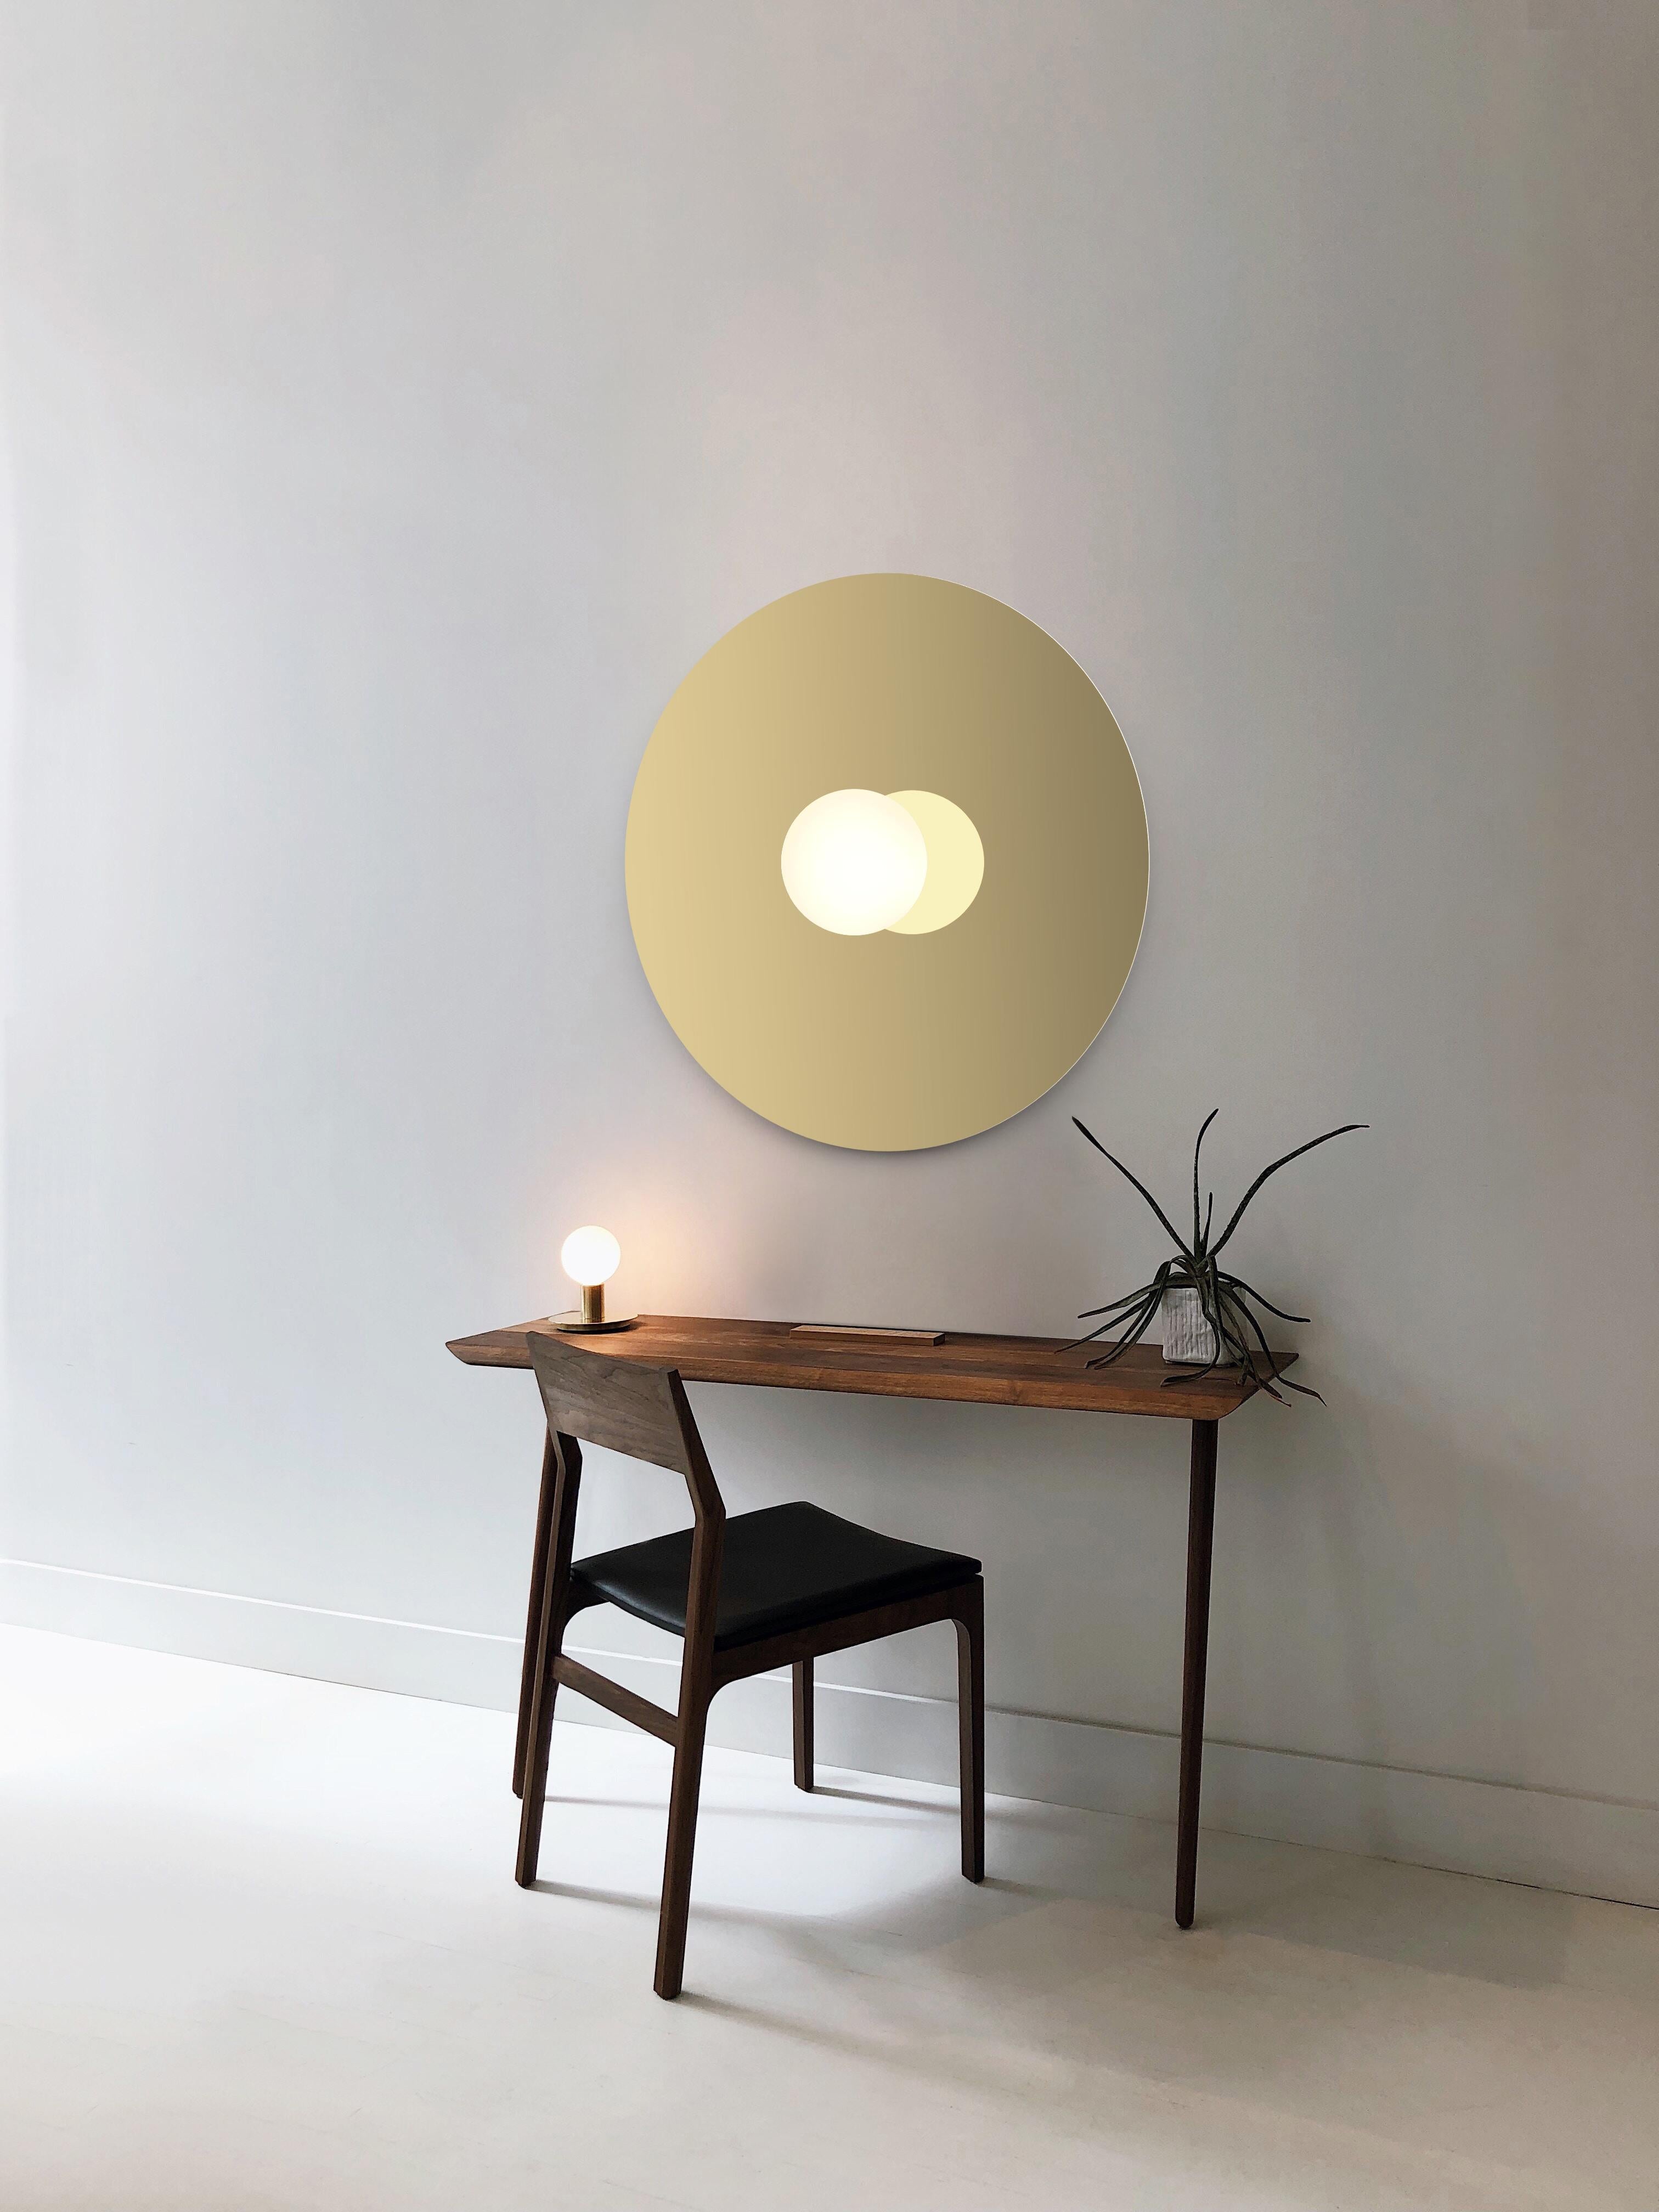 A study in refined simplicity, Bola Disc Flush offers a magical combination of mirror and globe refined down to its bare essentials. The objective with the Bola Disc Flush is to provide both direct and reflected light from either ceiling or wall